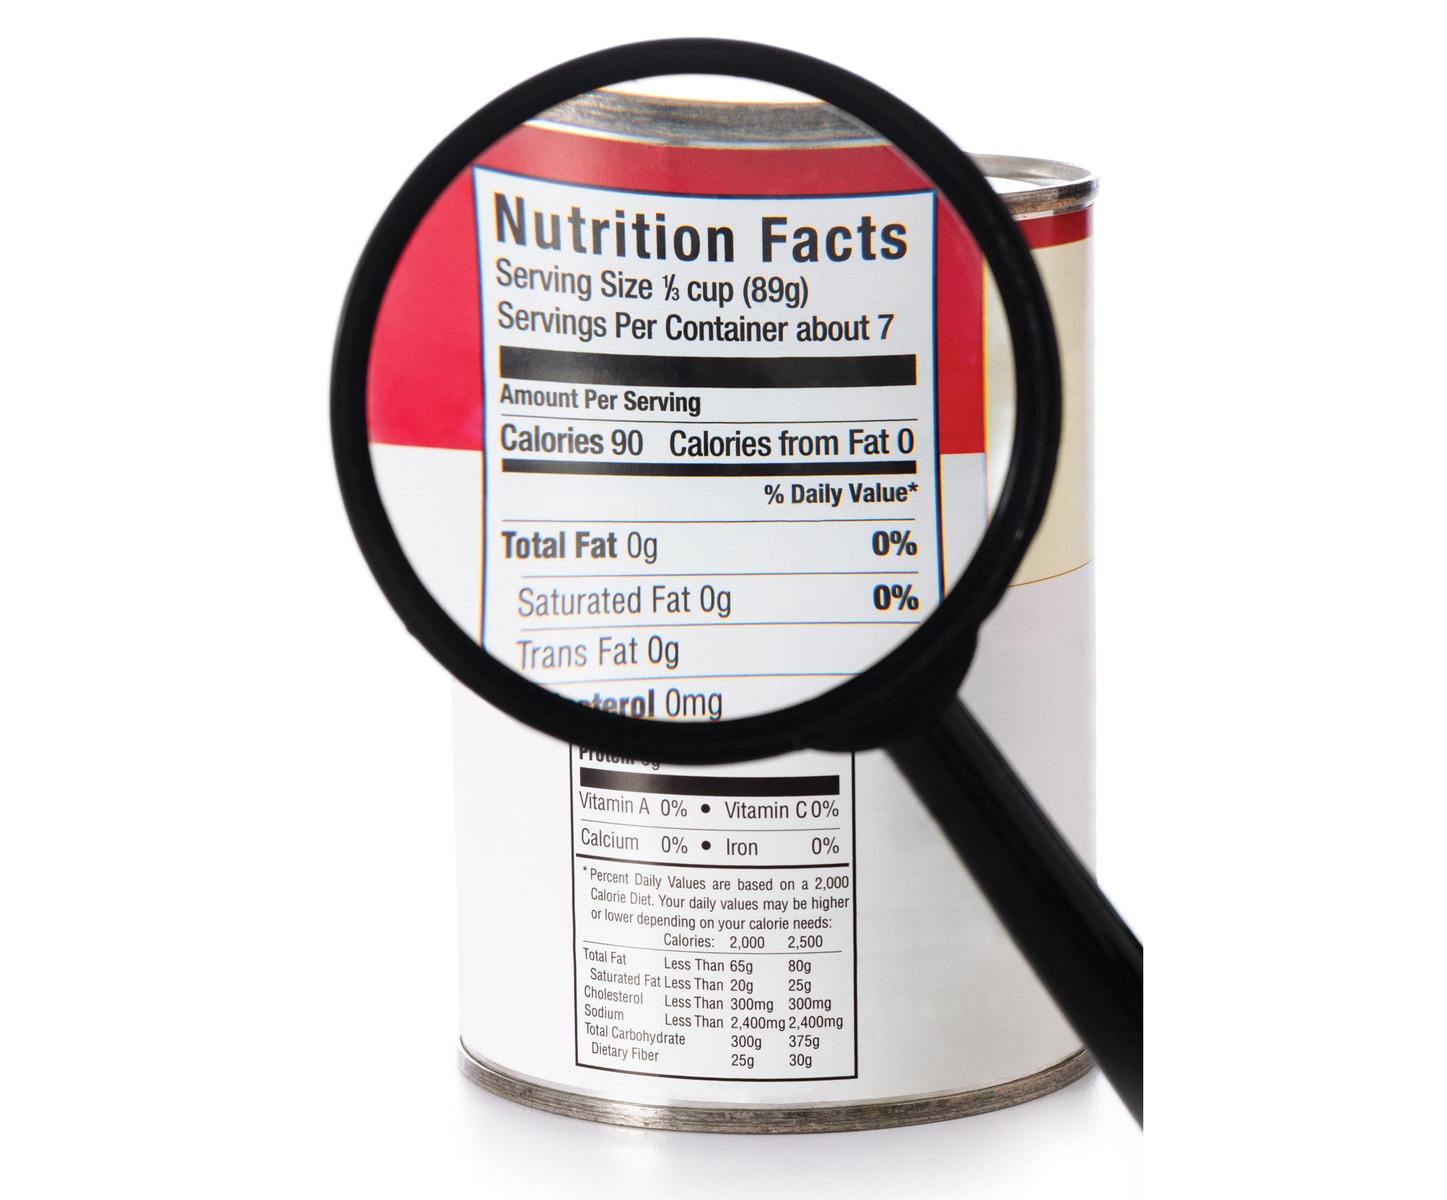 Foods With Nutrition Claim